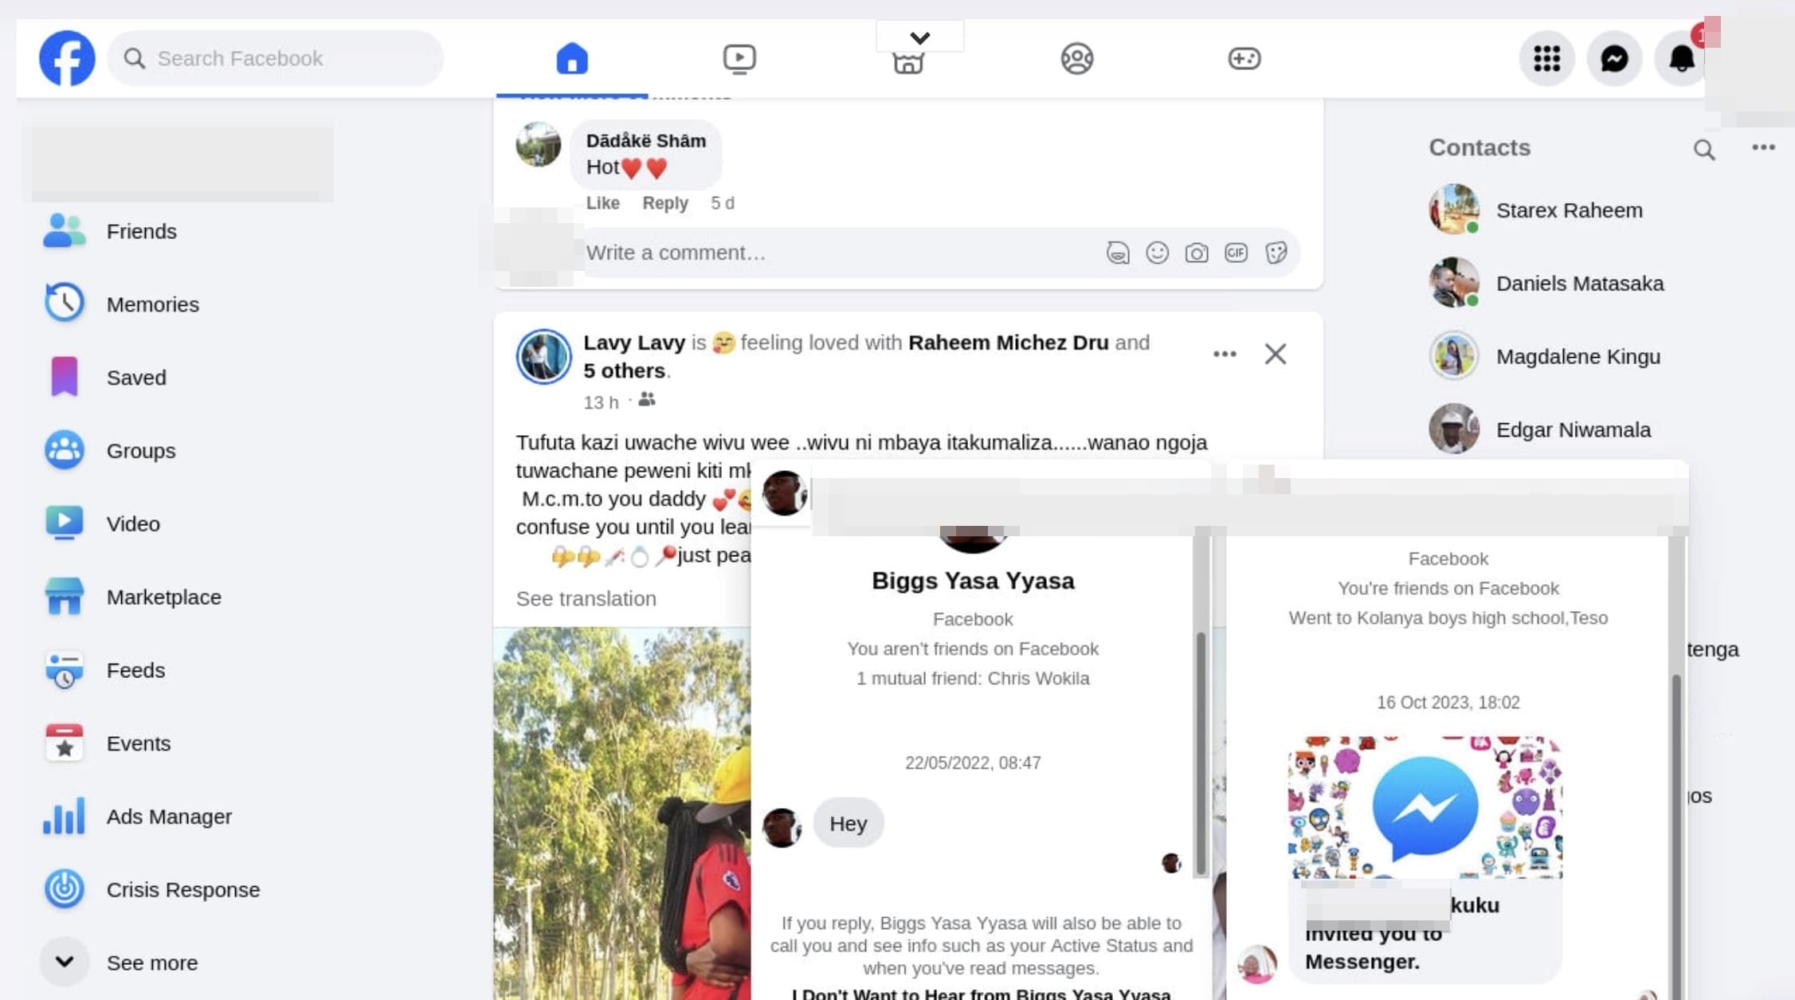 Screenshot of Read messages from other Facebook users